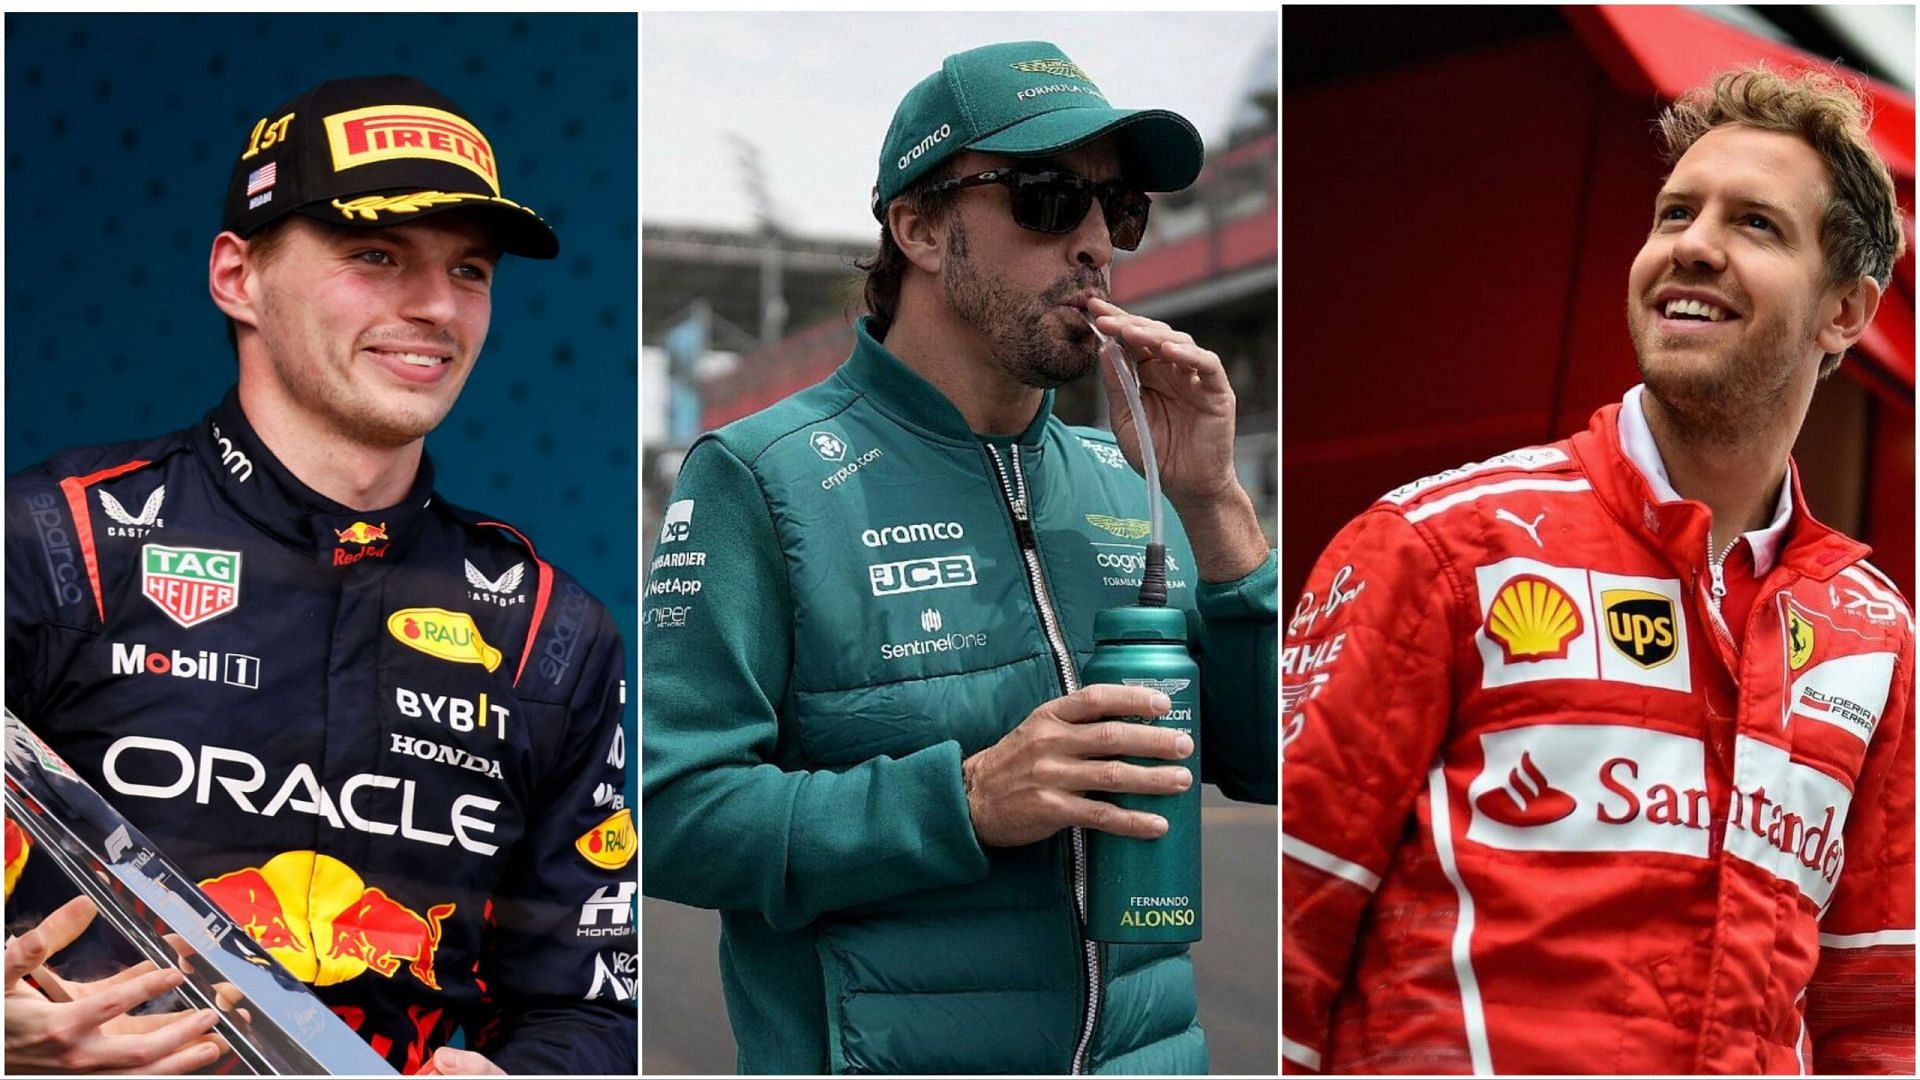 Verstappen, Alonso and Vettel have something in common